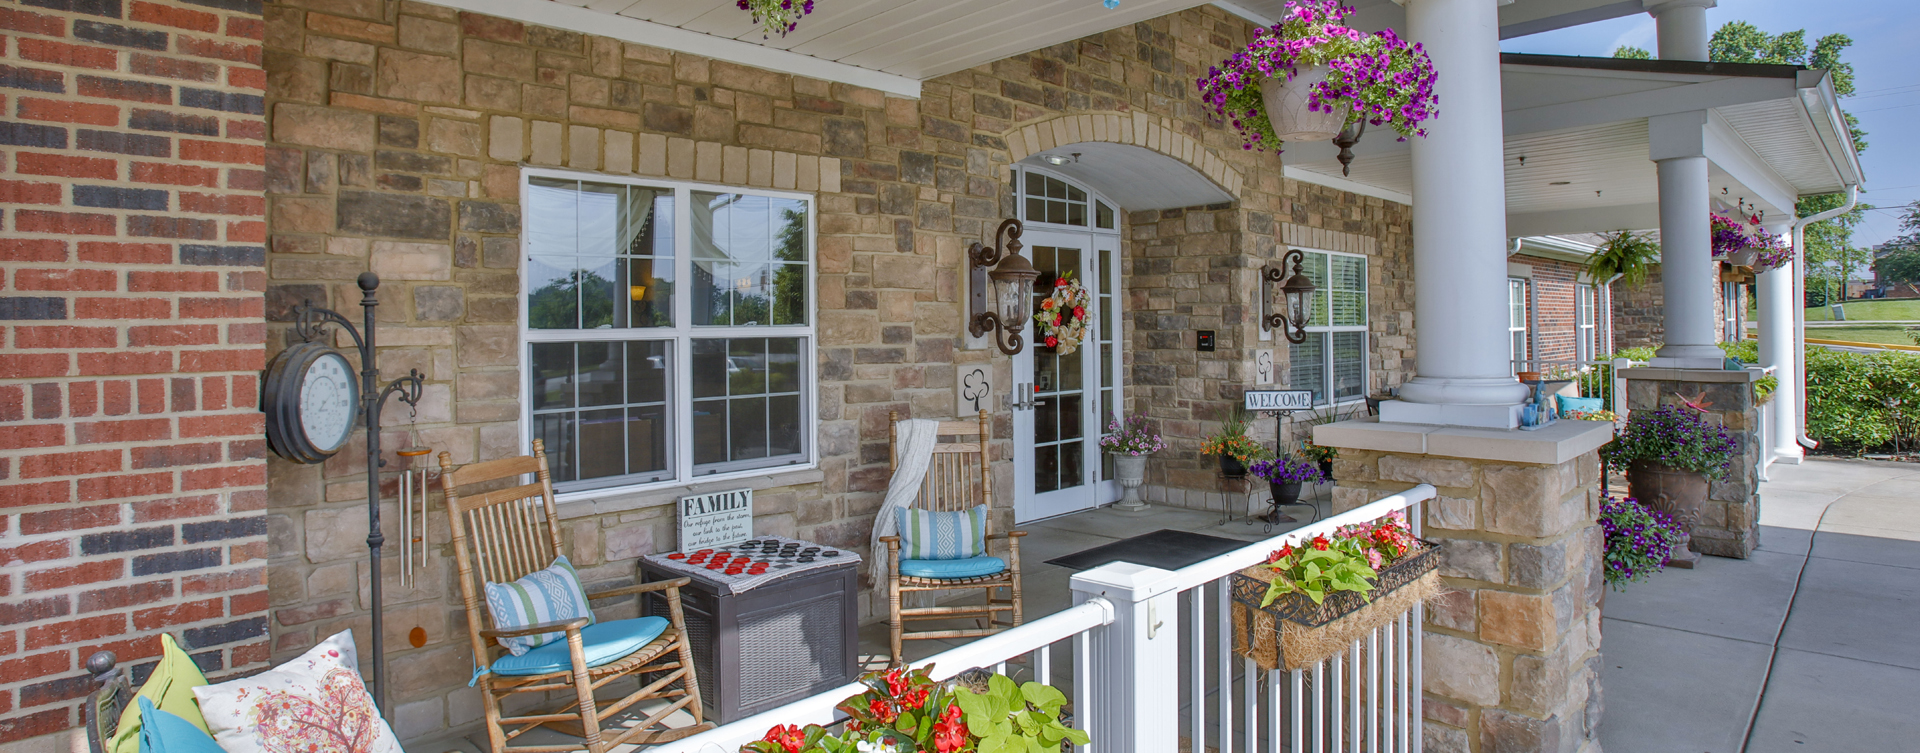 Enjoy conversations with friends on the porch at Bickford of Greenwood